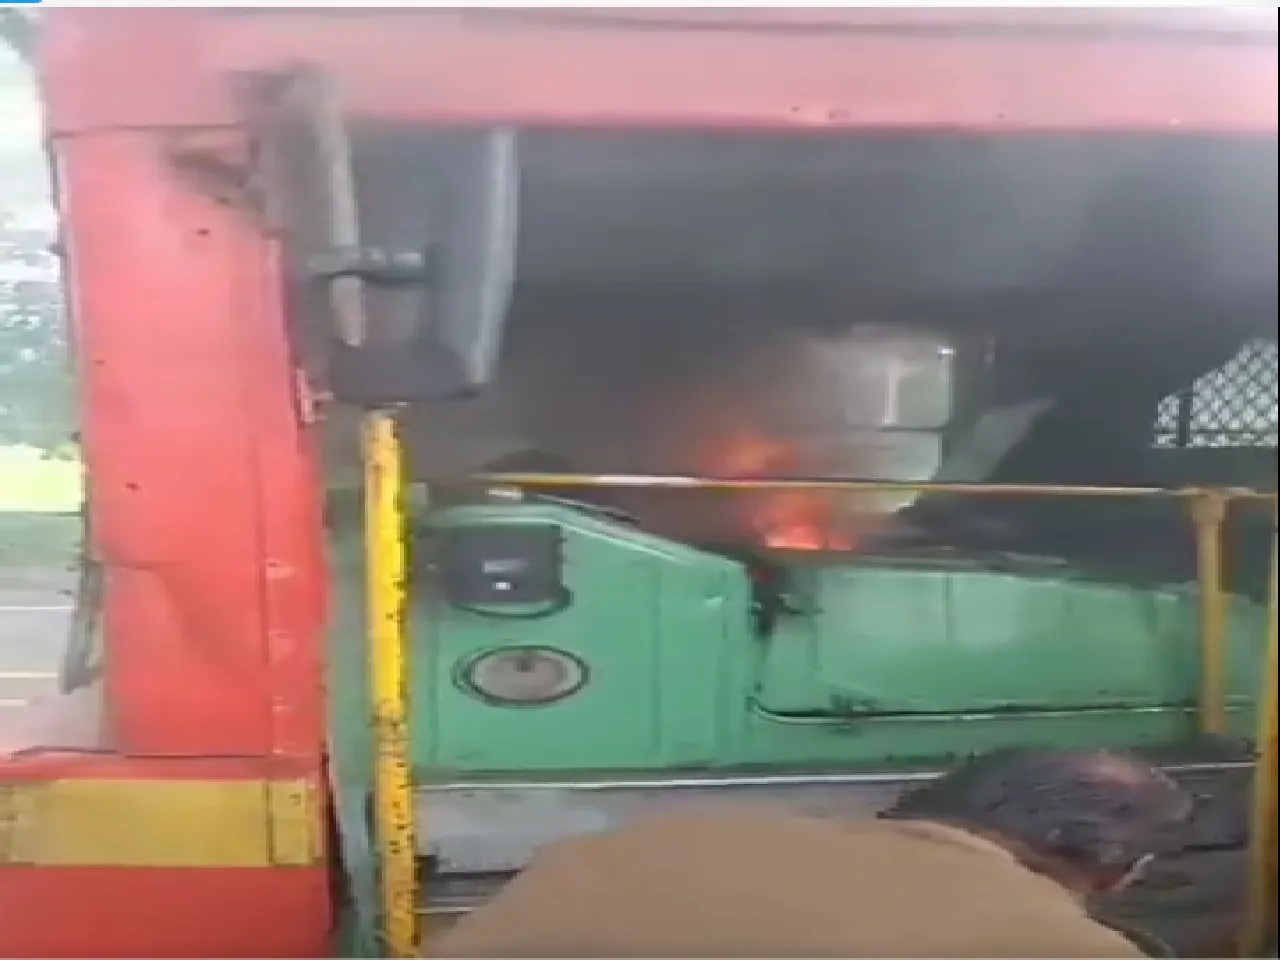 A sudden terrible fire in a moving bus